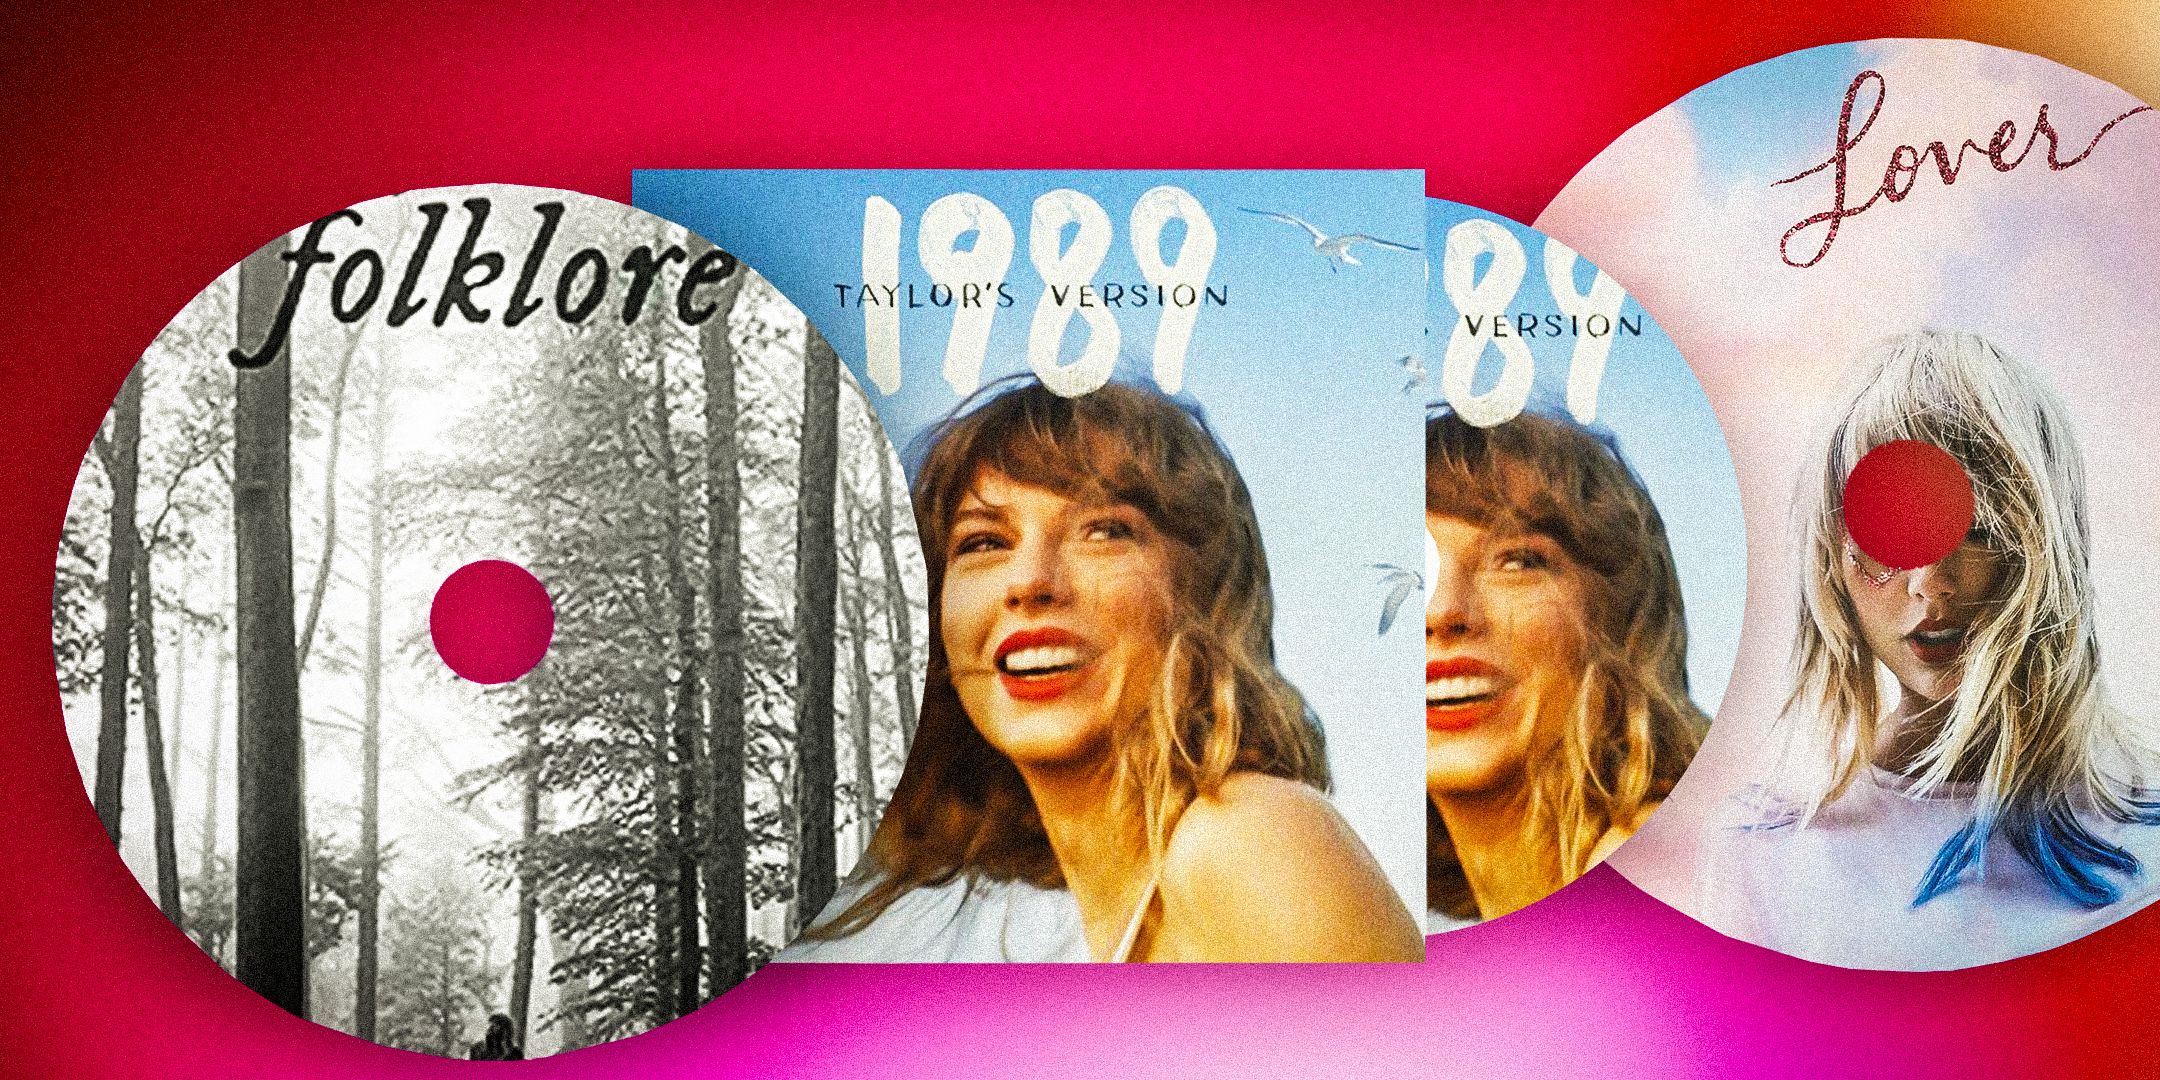 An image of the album covers for Taylor Swift's Folklore, 1989 (Taylor's Version), & Lover